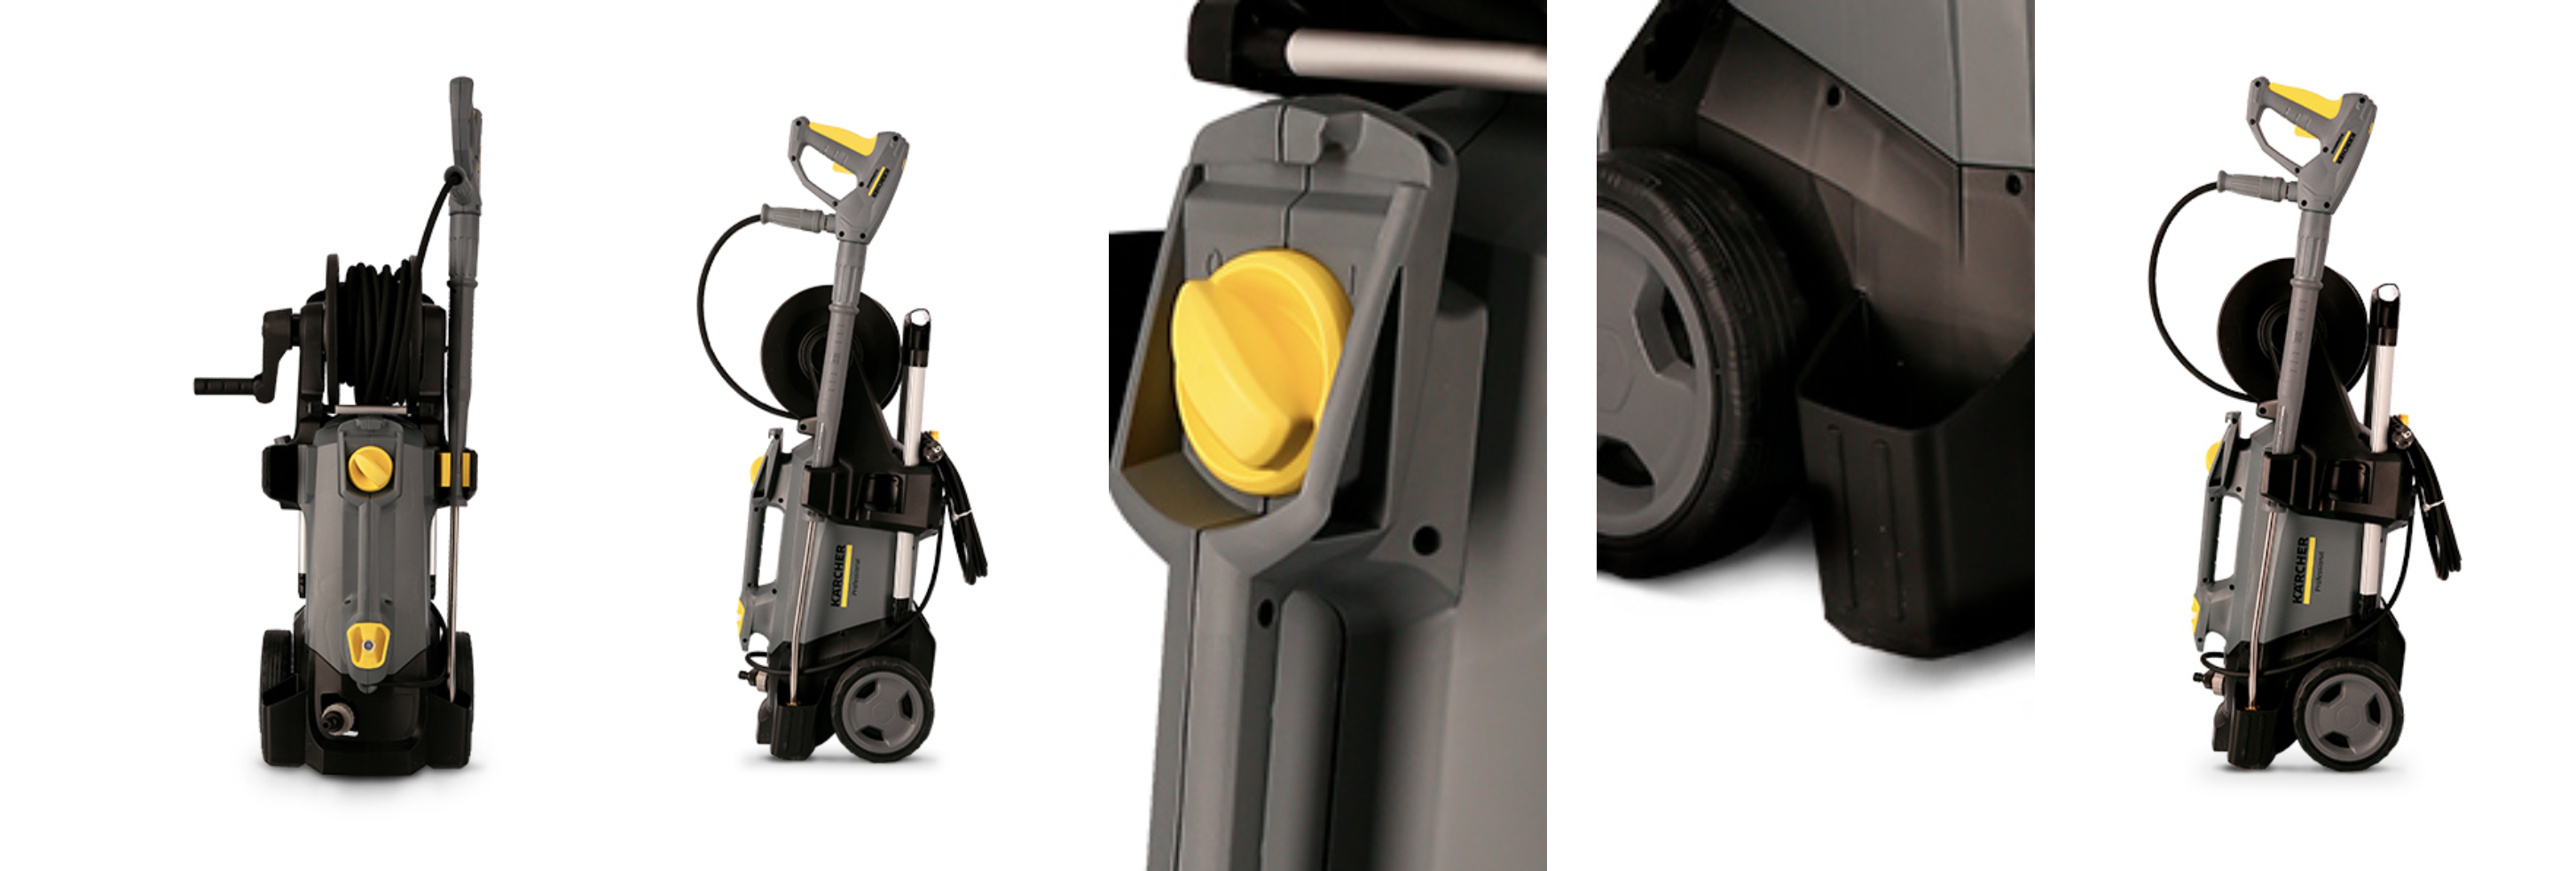 karcher details - product photography tips